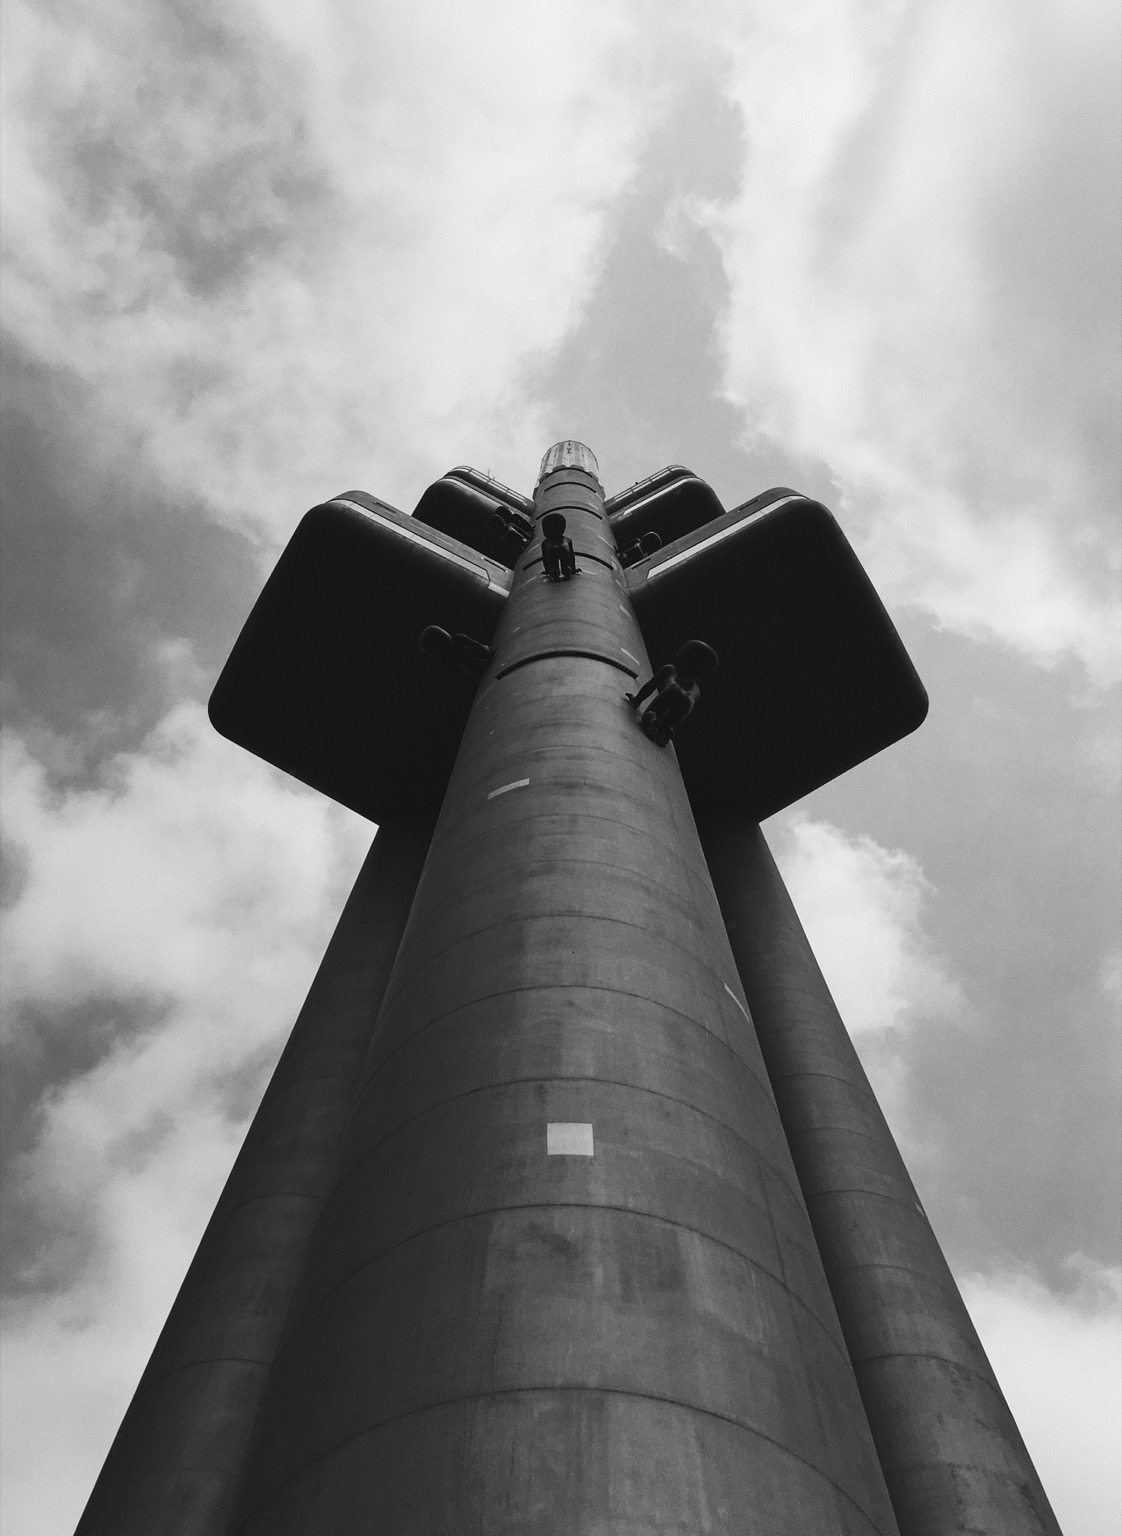 Black and white photography of Prague TV Tower, taken from the ground and looking at the top of the tower.